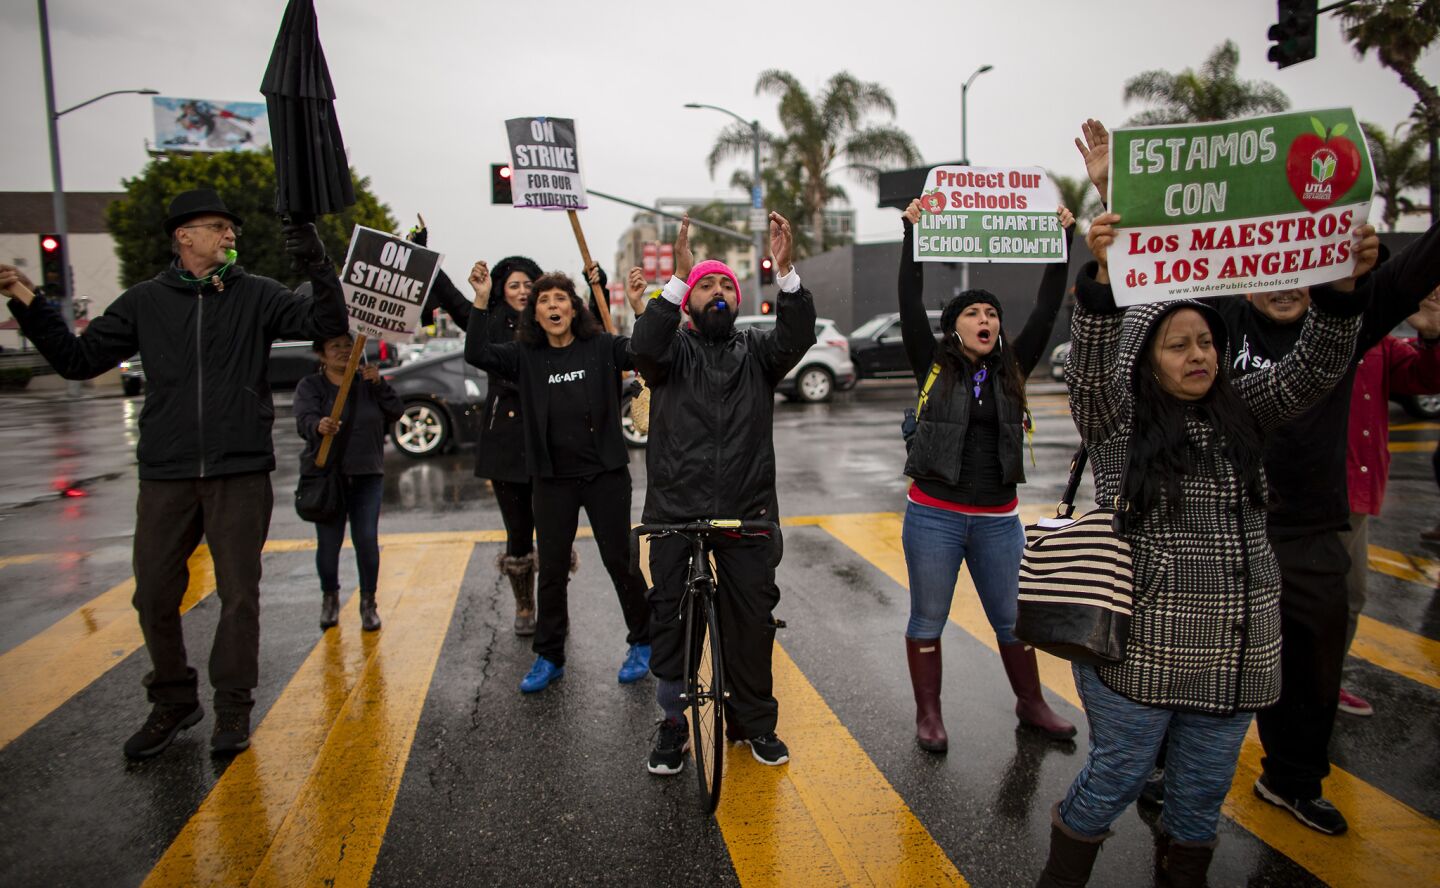 Student counselor Edwin Deleon, on a bicycle, joins parents, teachers and students in a crosswalk to picket outside Hollywood High School during the second day of the United Teachers Los Angeles strike.